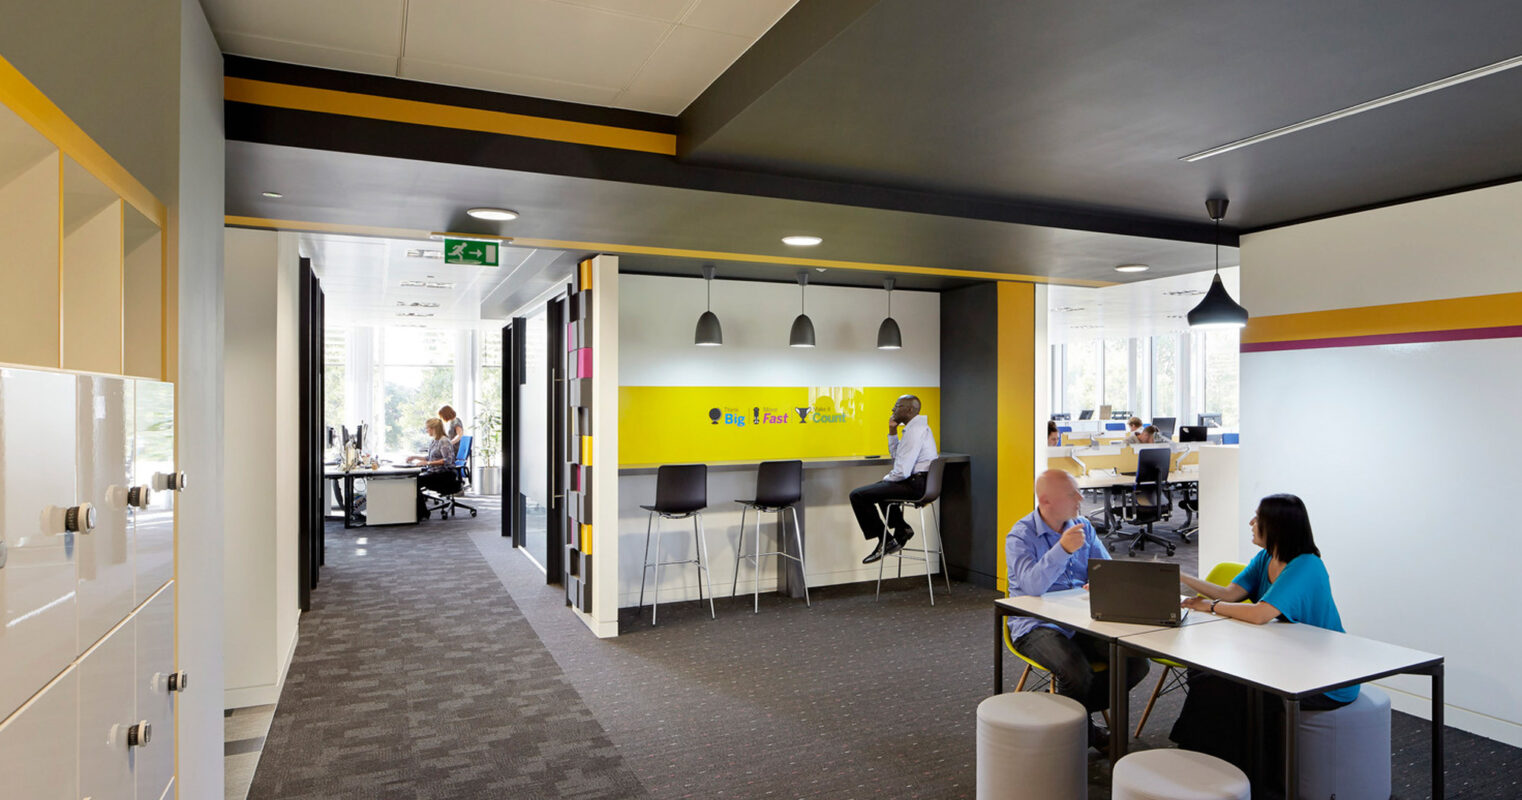 Modern office space with vibrant yellow and white accents, featuring an open layout with glass partitions, ergonomic furniture, and a collaborative work area illuminated by abundant natural light.